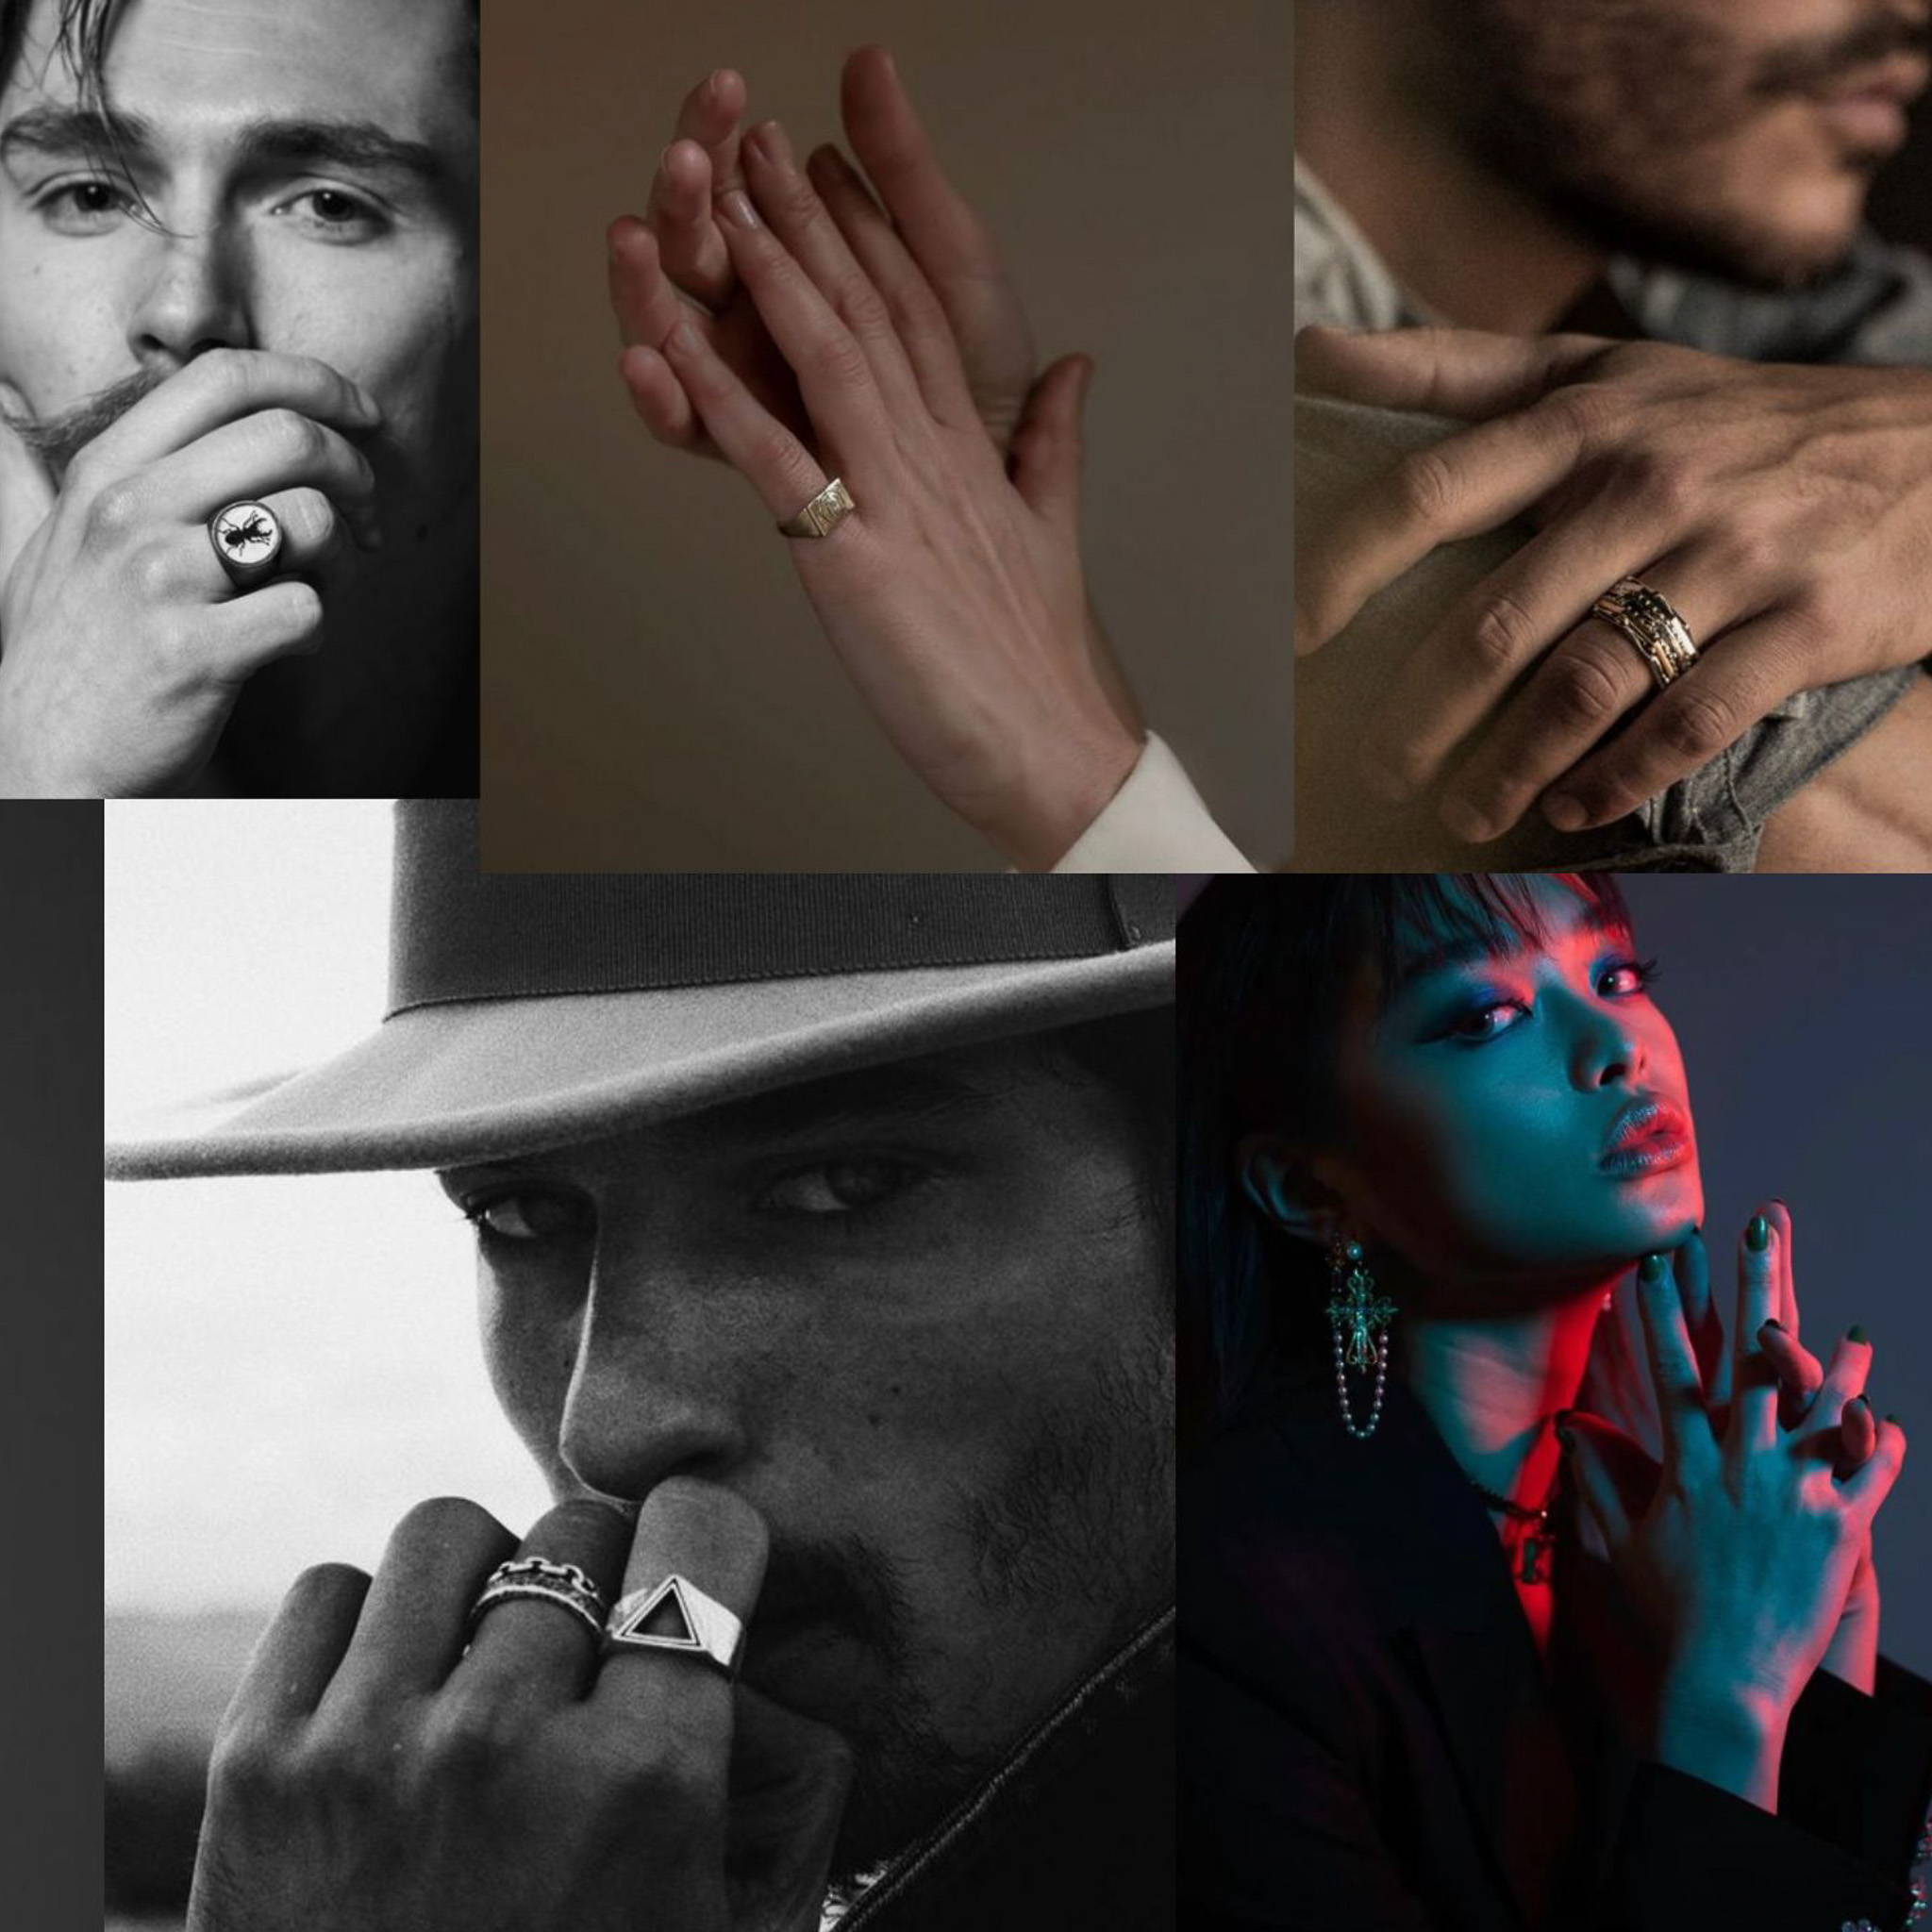 A collage of images featuring hands in various poses on or around faces. Each hand is wearing a different style of ring jewellery which can be seen close-up. 